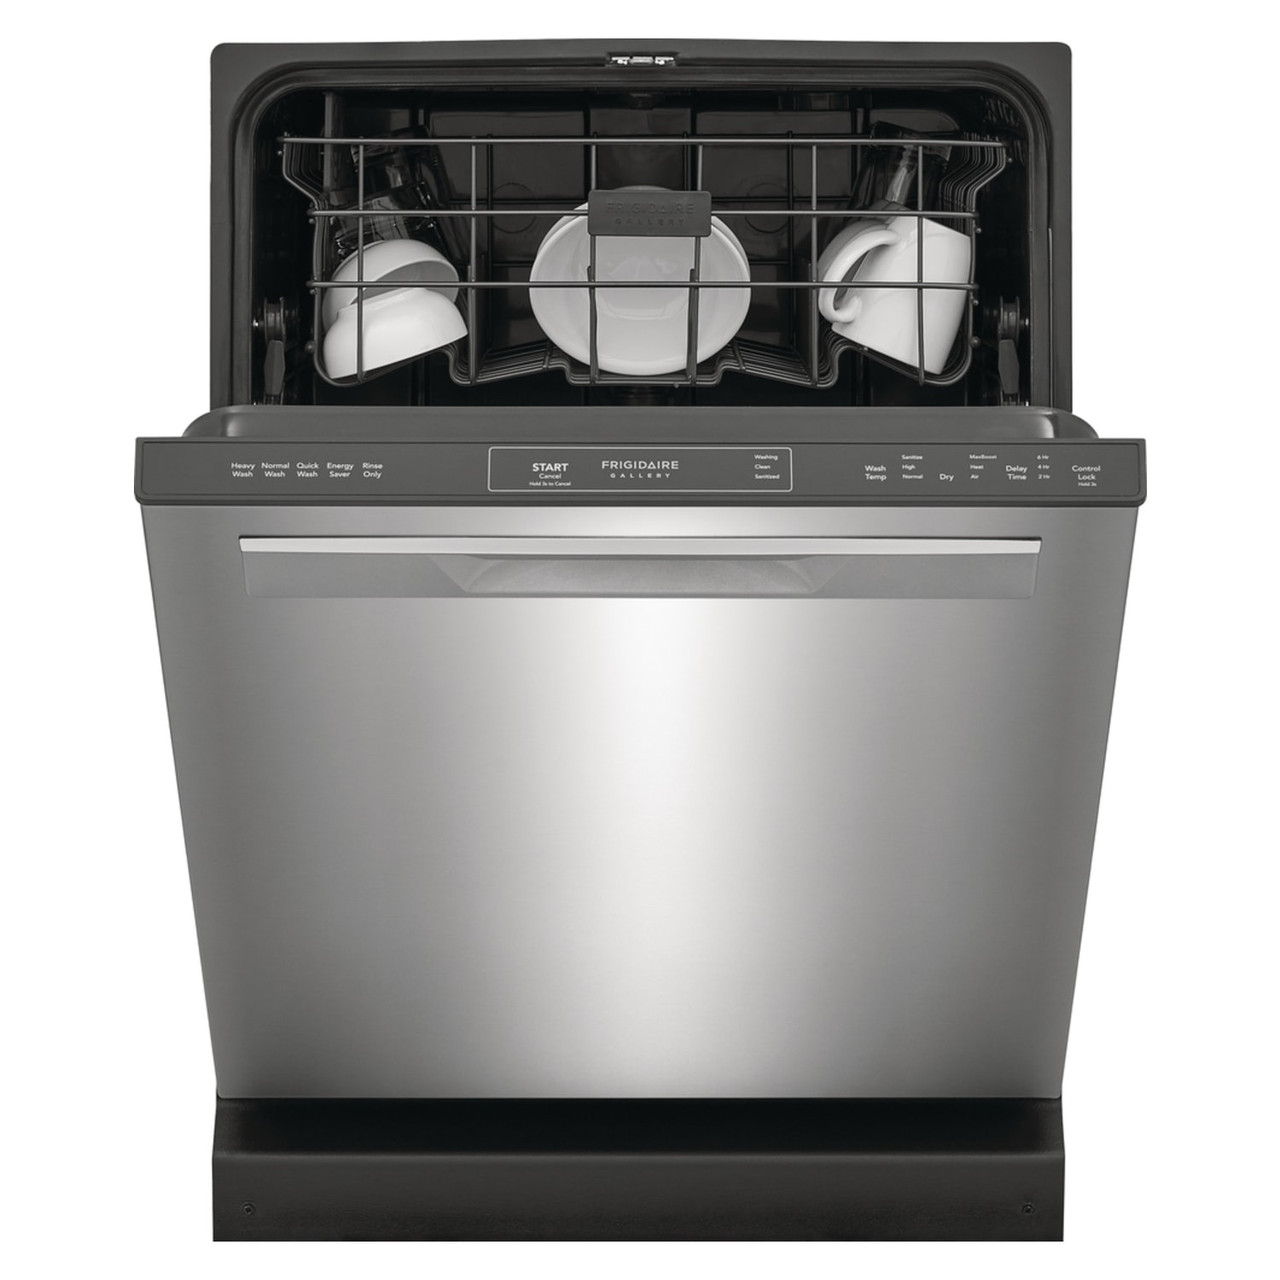 Frigidaire Gallery 24” Built-In Stainless Steel Dishwasher - GDPP4515AF